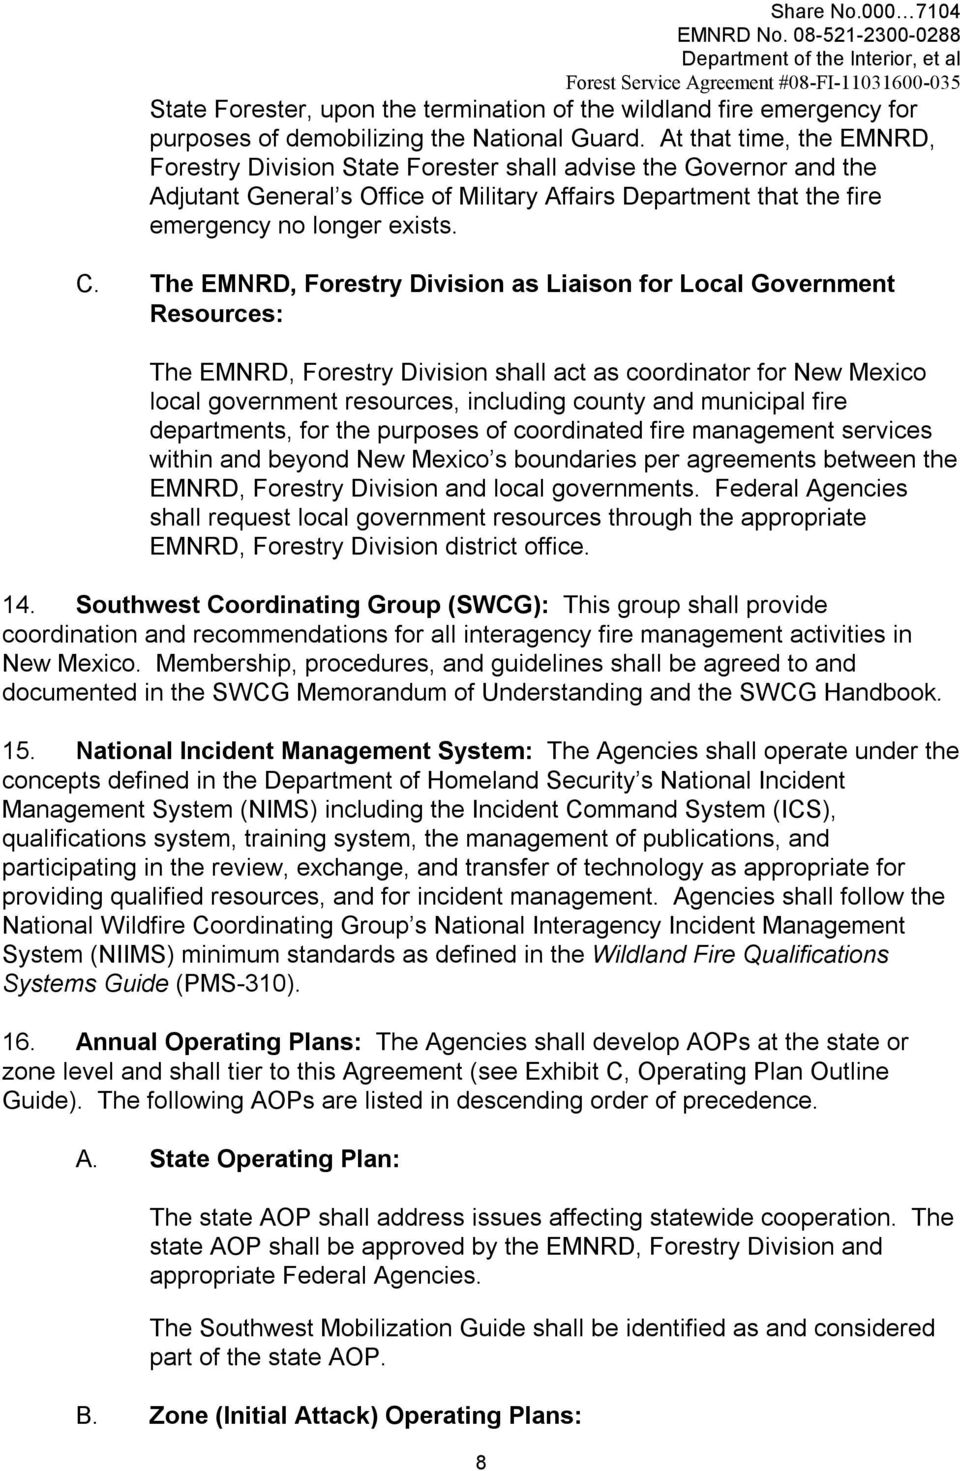 The EMNRD, Forestry Division as Liaison for Local Government Resources: The EMNRD, Forestry Division shall act as coordinator for New Mexico local government resources, including county and municipal